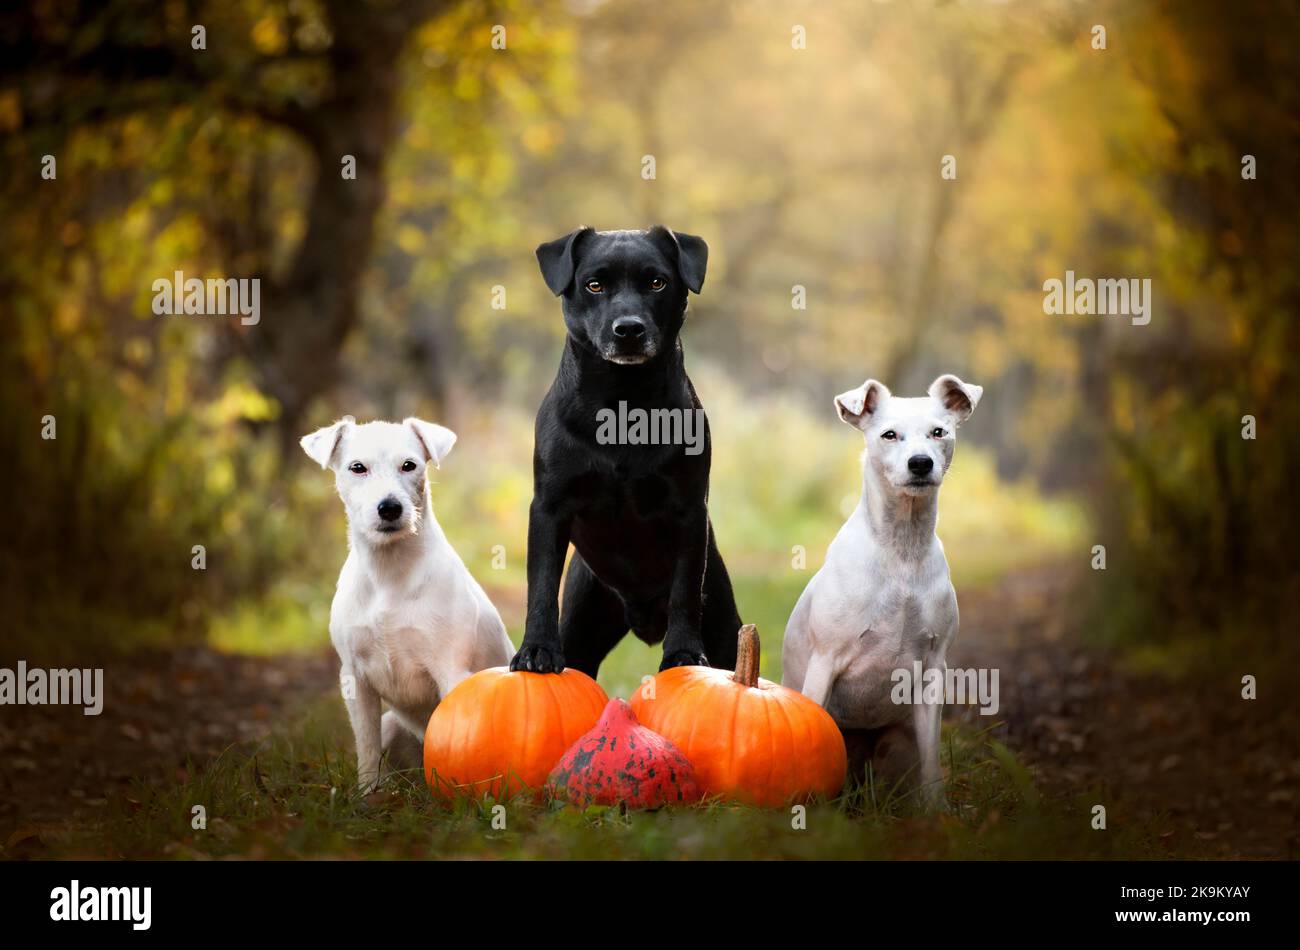 Patterdale terrier and Jack Russell. Autumn portrait of terrier dogs. Halloween Stock Photo